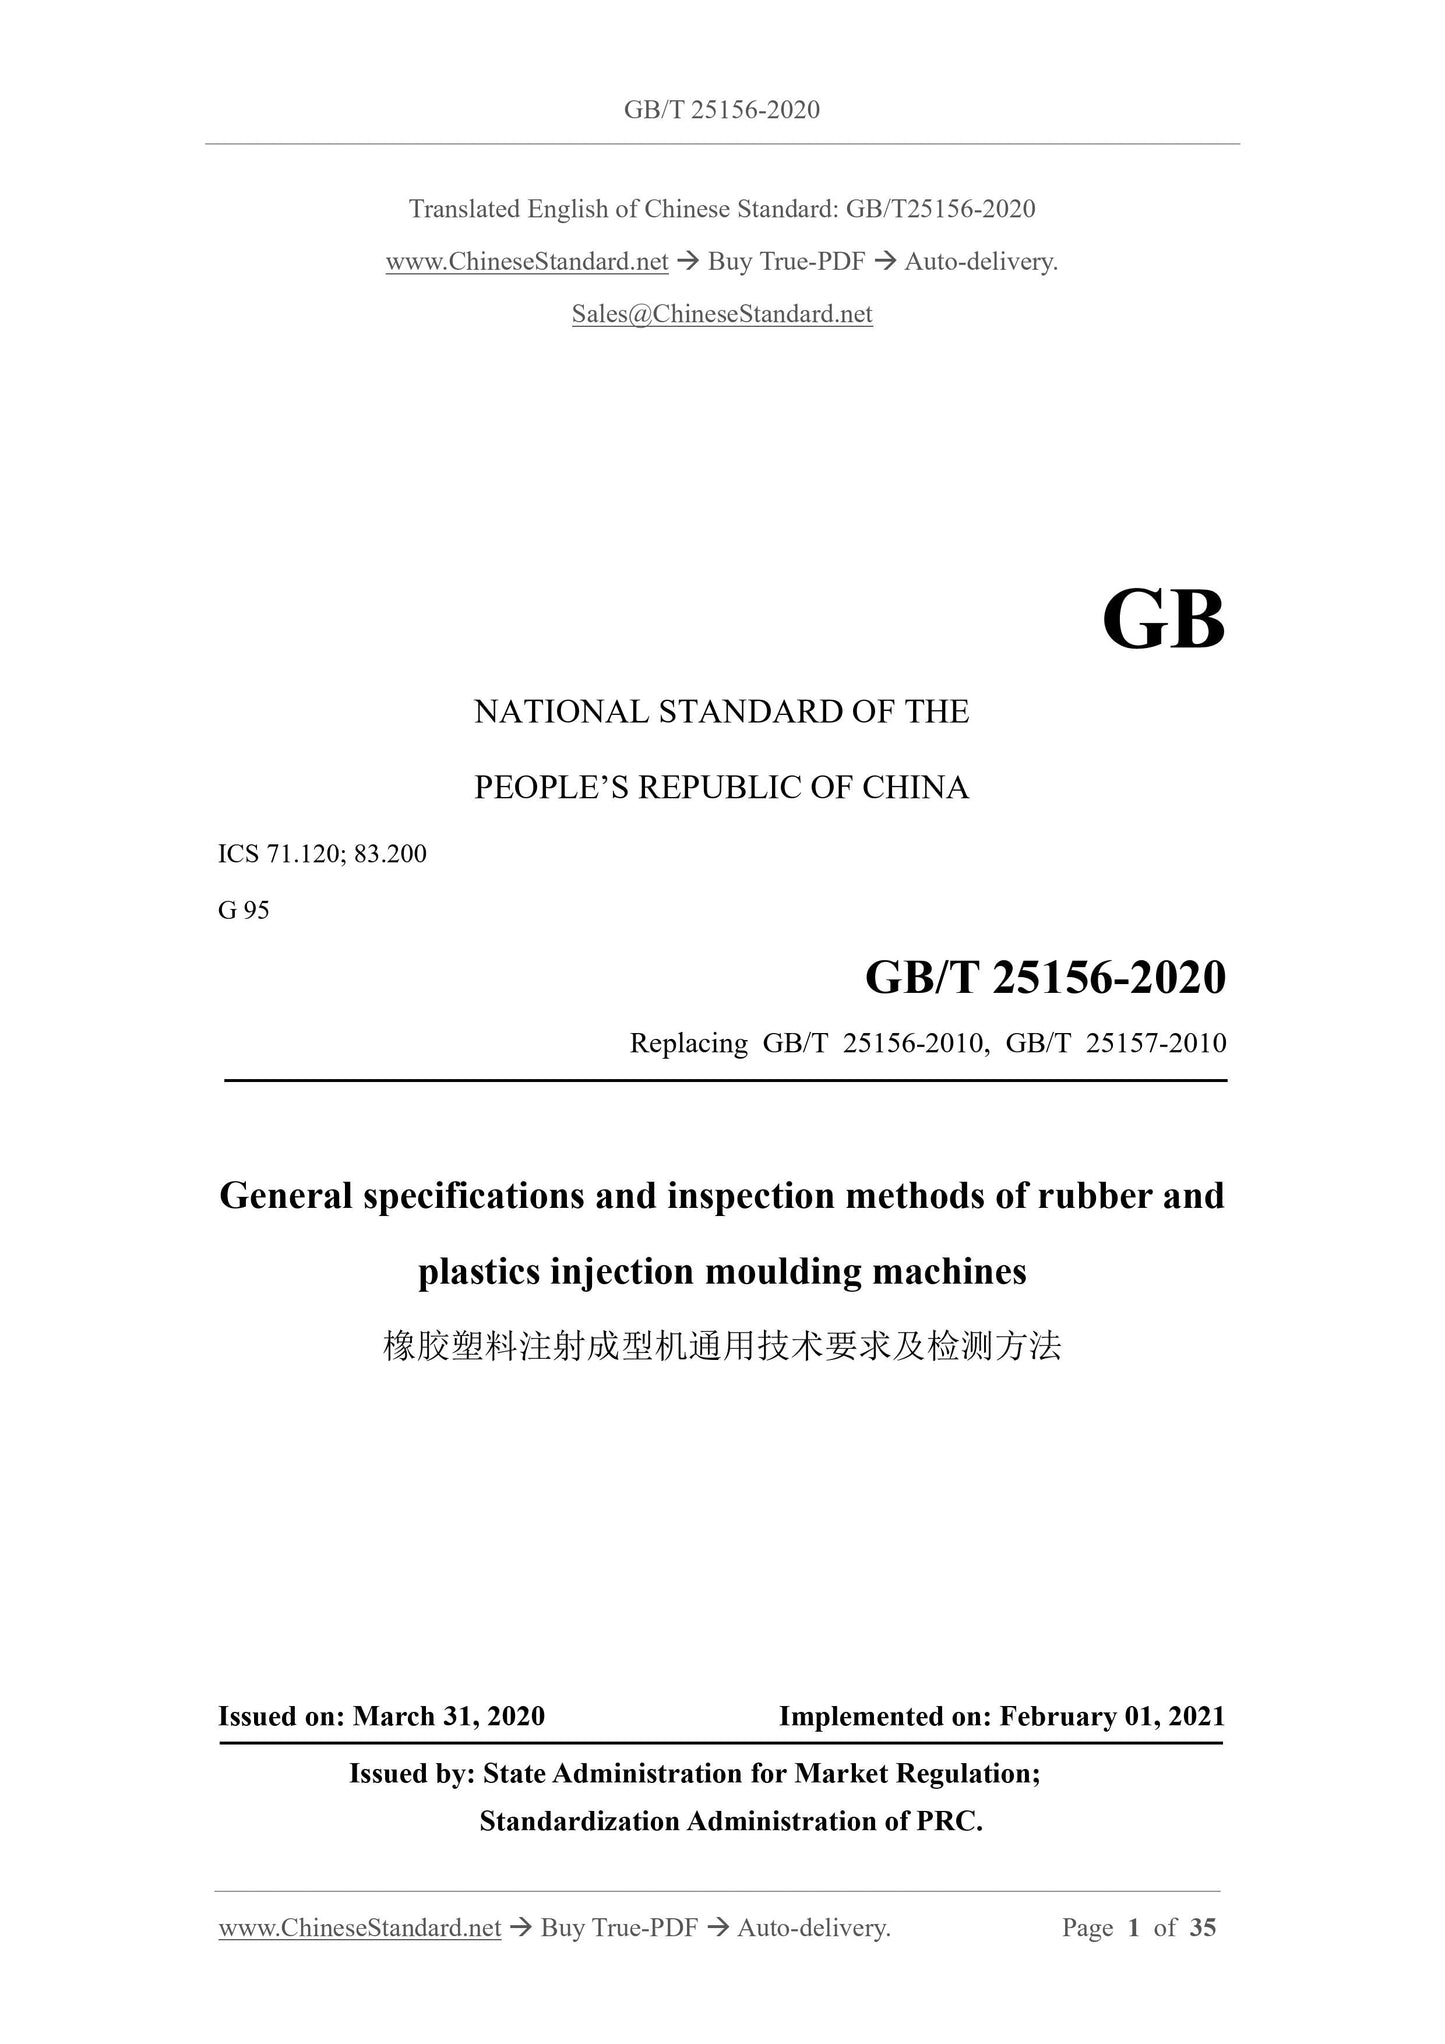 GB/T 25156-2020 Page 1